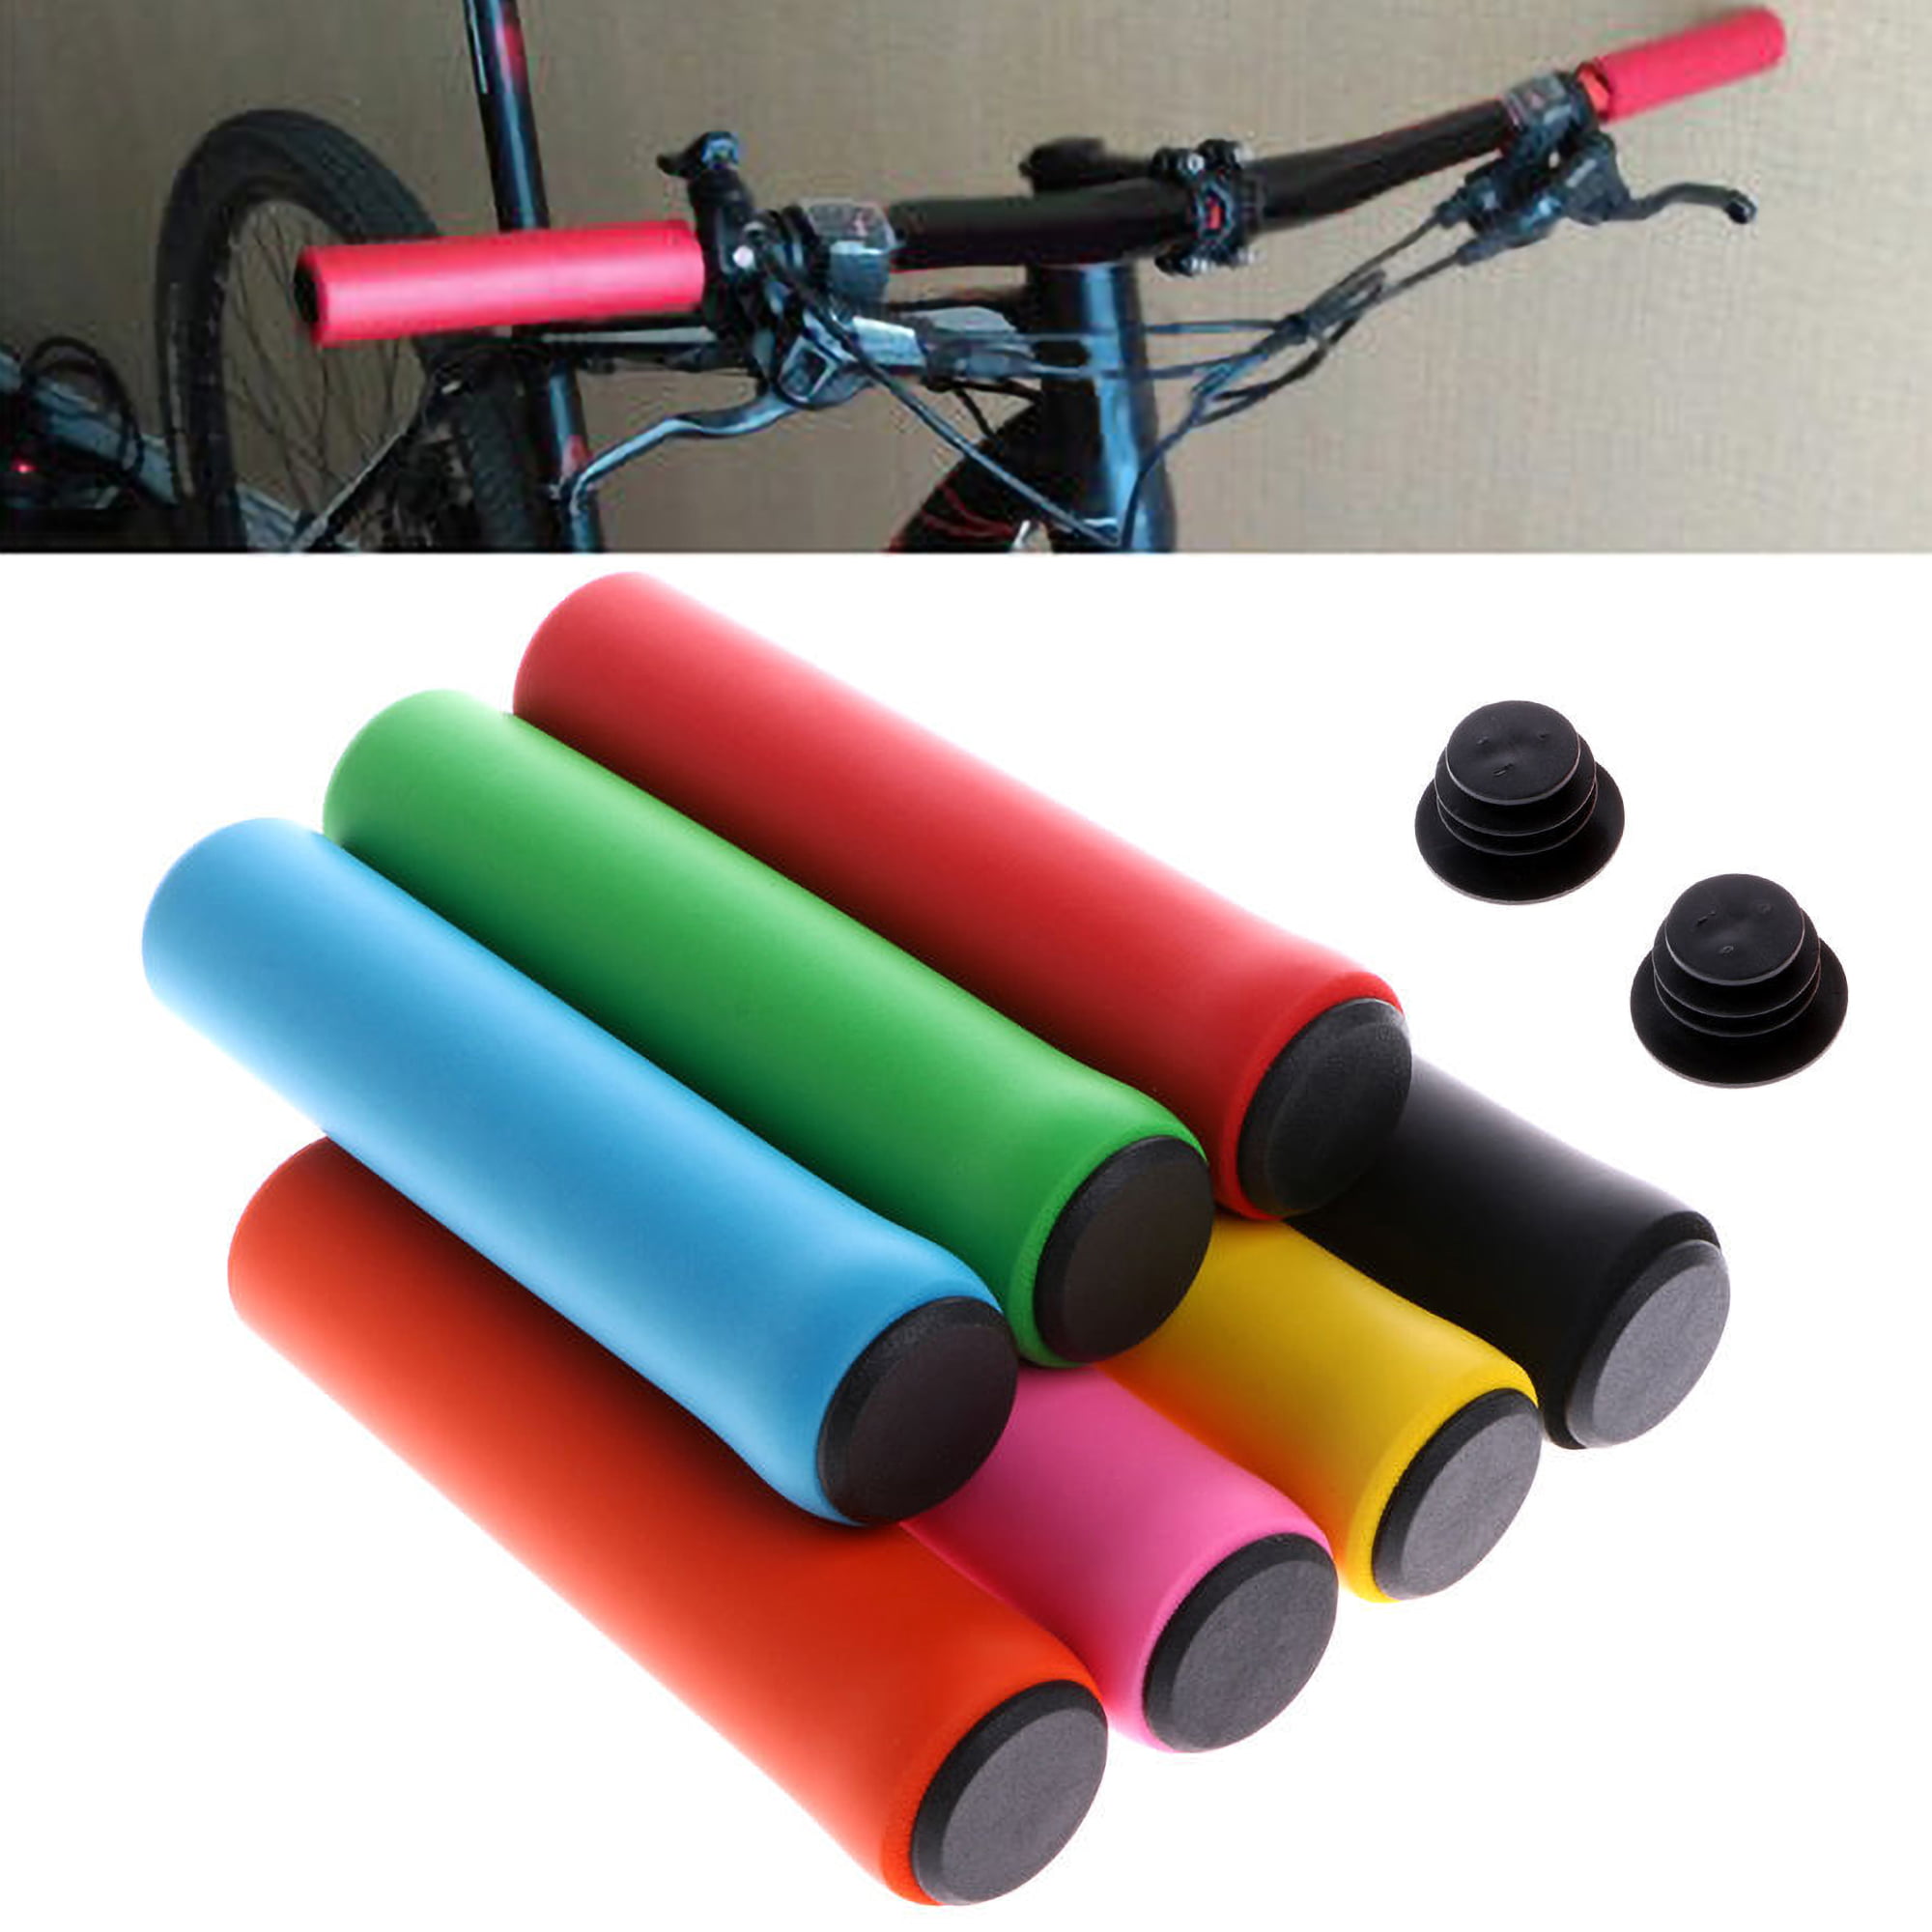 Bicycle Handlebars 2 Pairs Soft Grips Bicycle Grips Handlebar Grip Cover for Mountain Bikes Portable Bicycle Grips Soft Handlebar Grip Cover for Mountain Bikes Road Bike MTB Bicycle Handlebar Rubber Grips